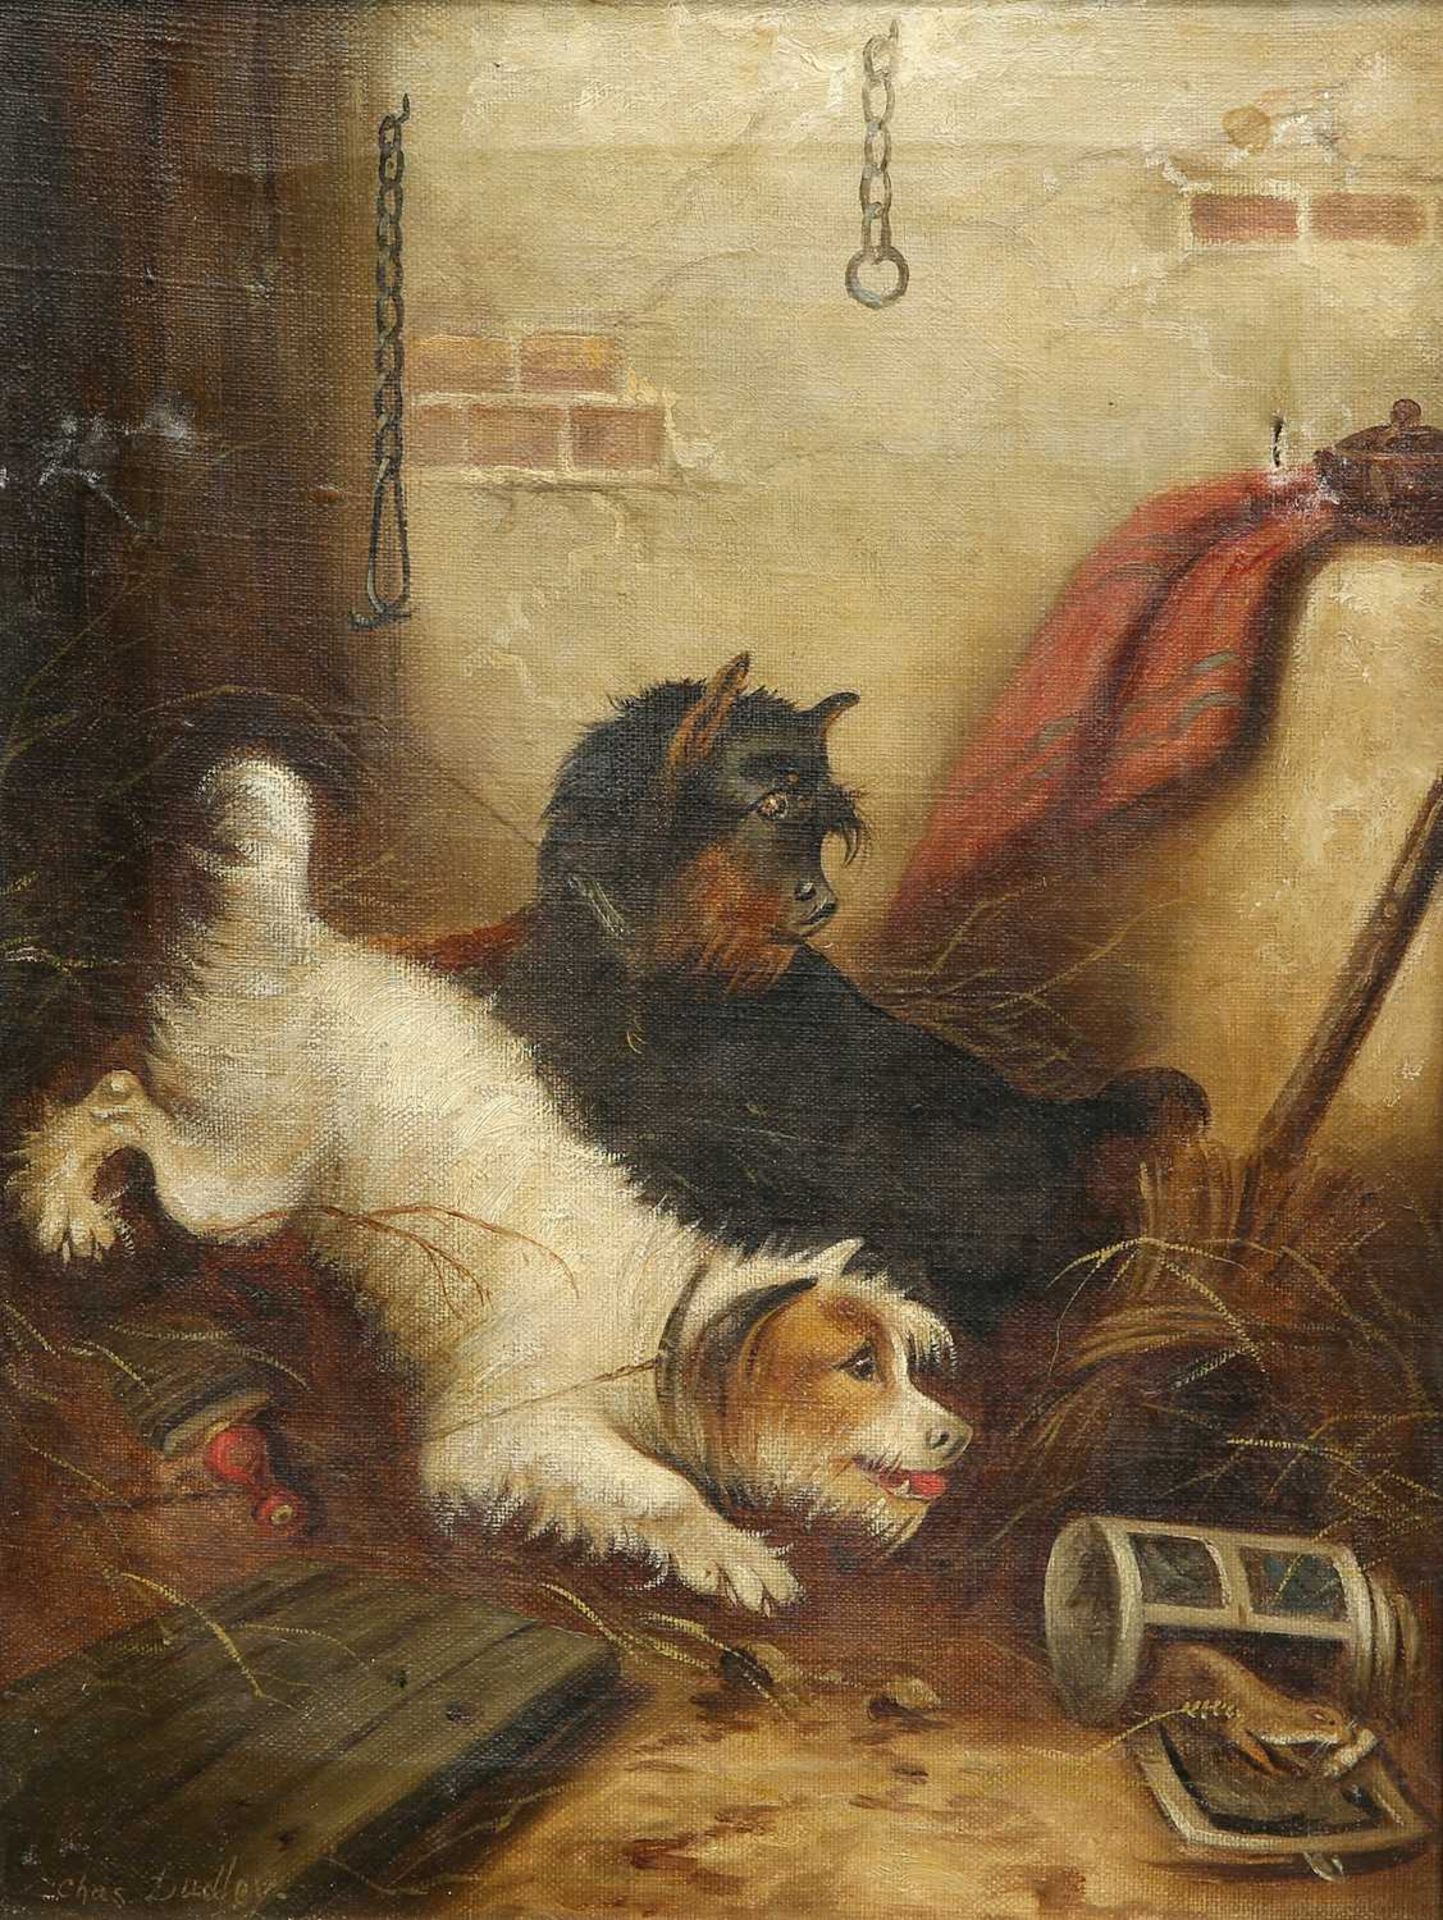 CHARLES DUDLEY (1826-1909) A PAIR OF PICTURES OF TERRIERS CATCHING RATS